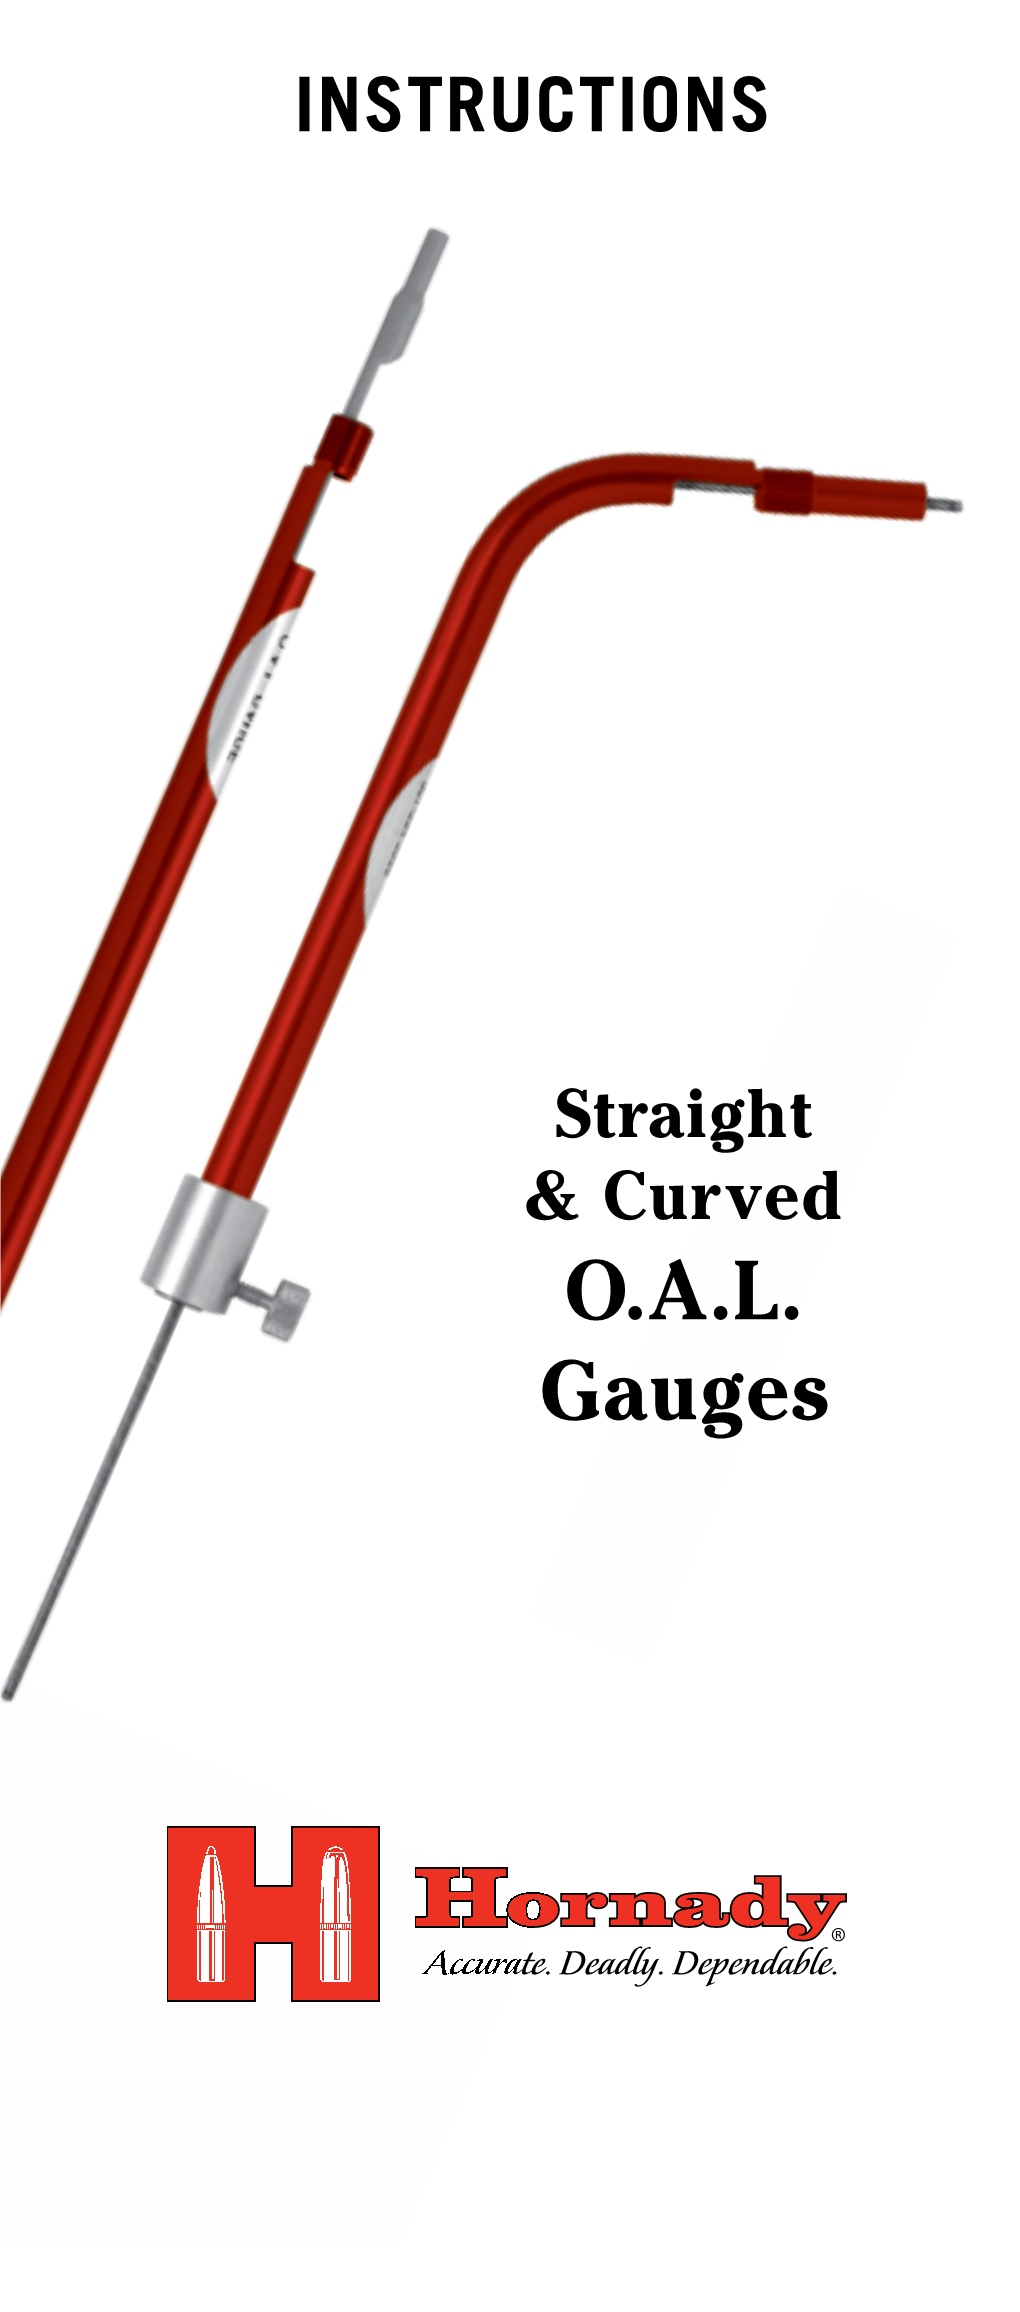 O.A.L. Gauges the Initial Distance a Bullet Travels Is Critical to an Accurate Handload